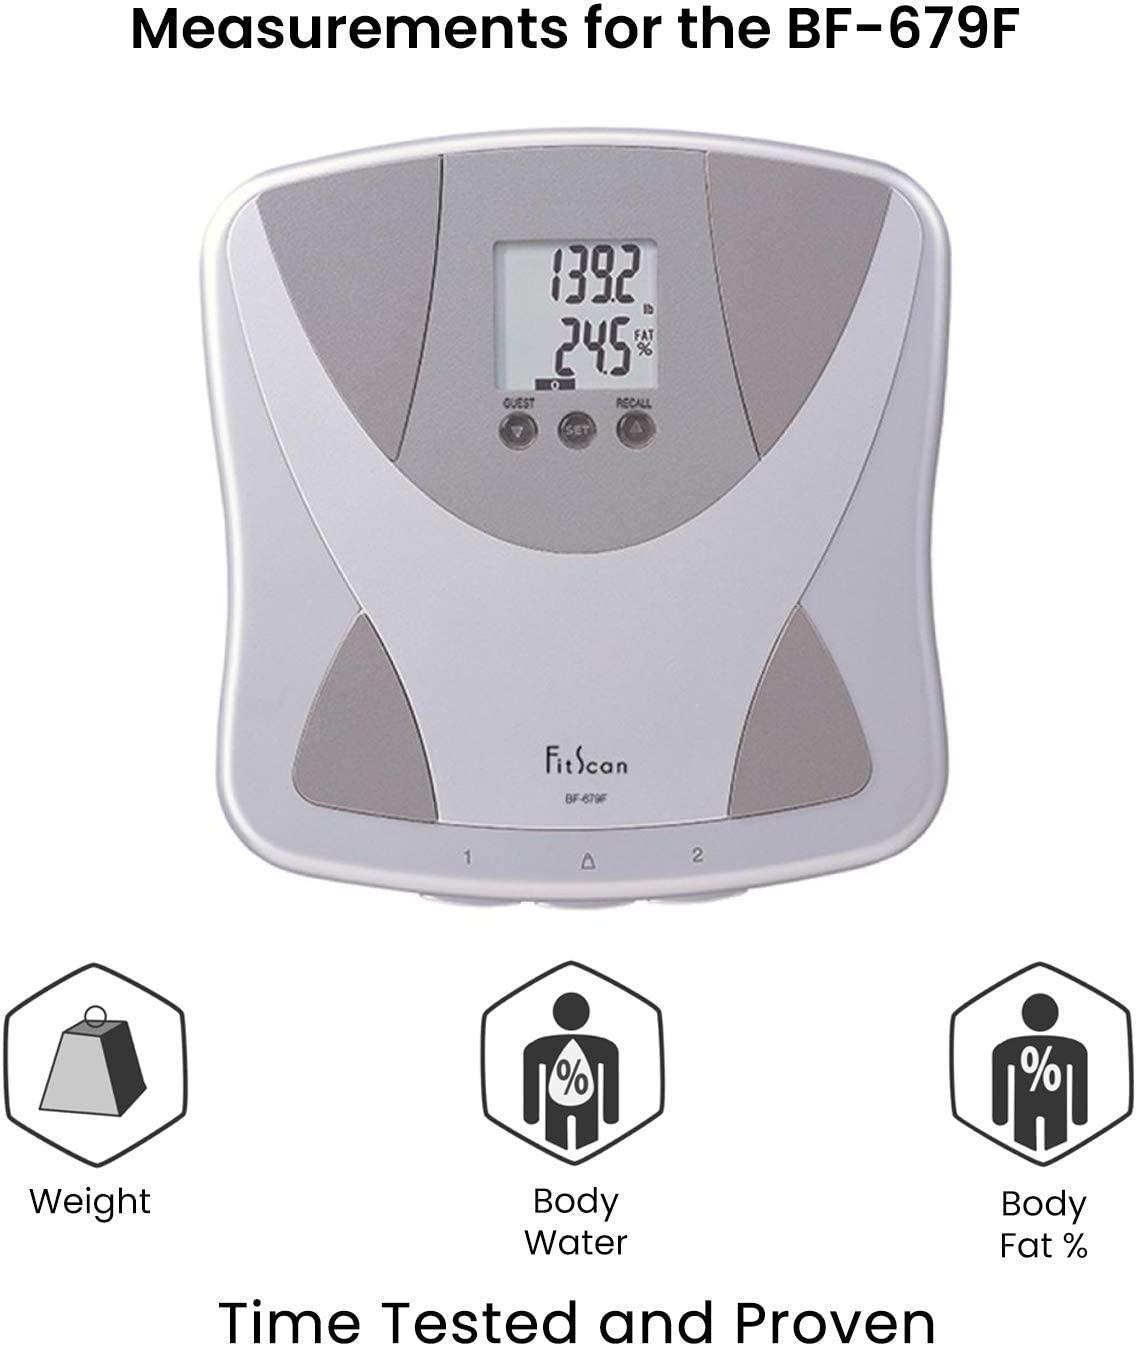 BF-679F FitScan Body Fat / Body Water Monitor With Athlete Mode